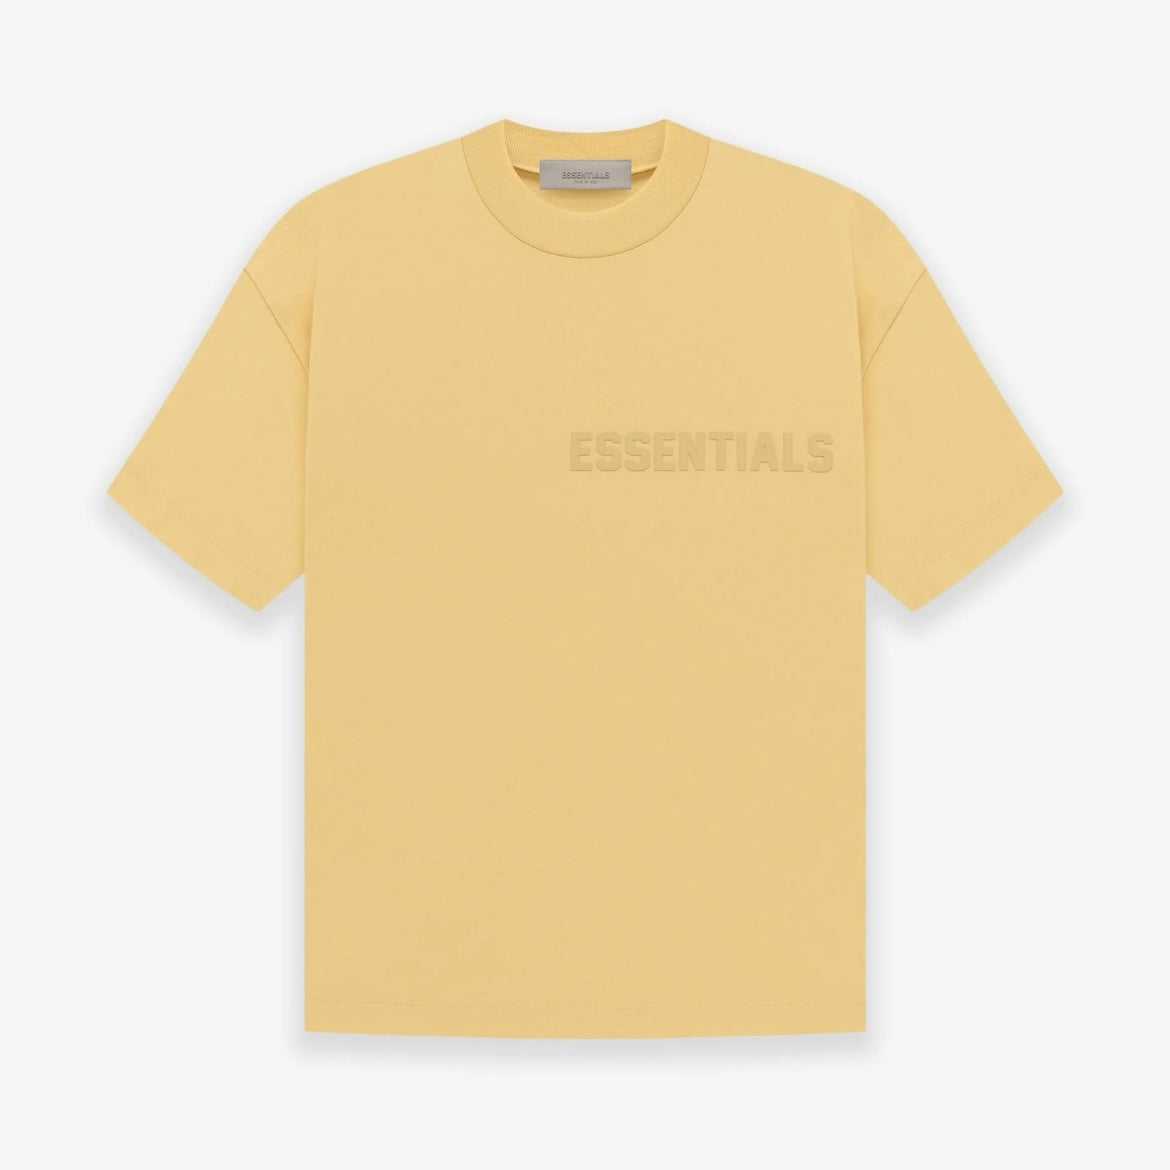 Fear of God Essentials Light Tuscan T-Shirt Front VIew